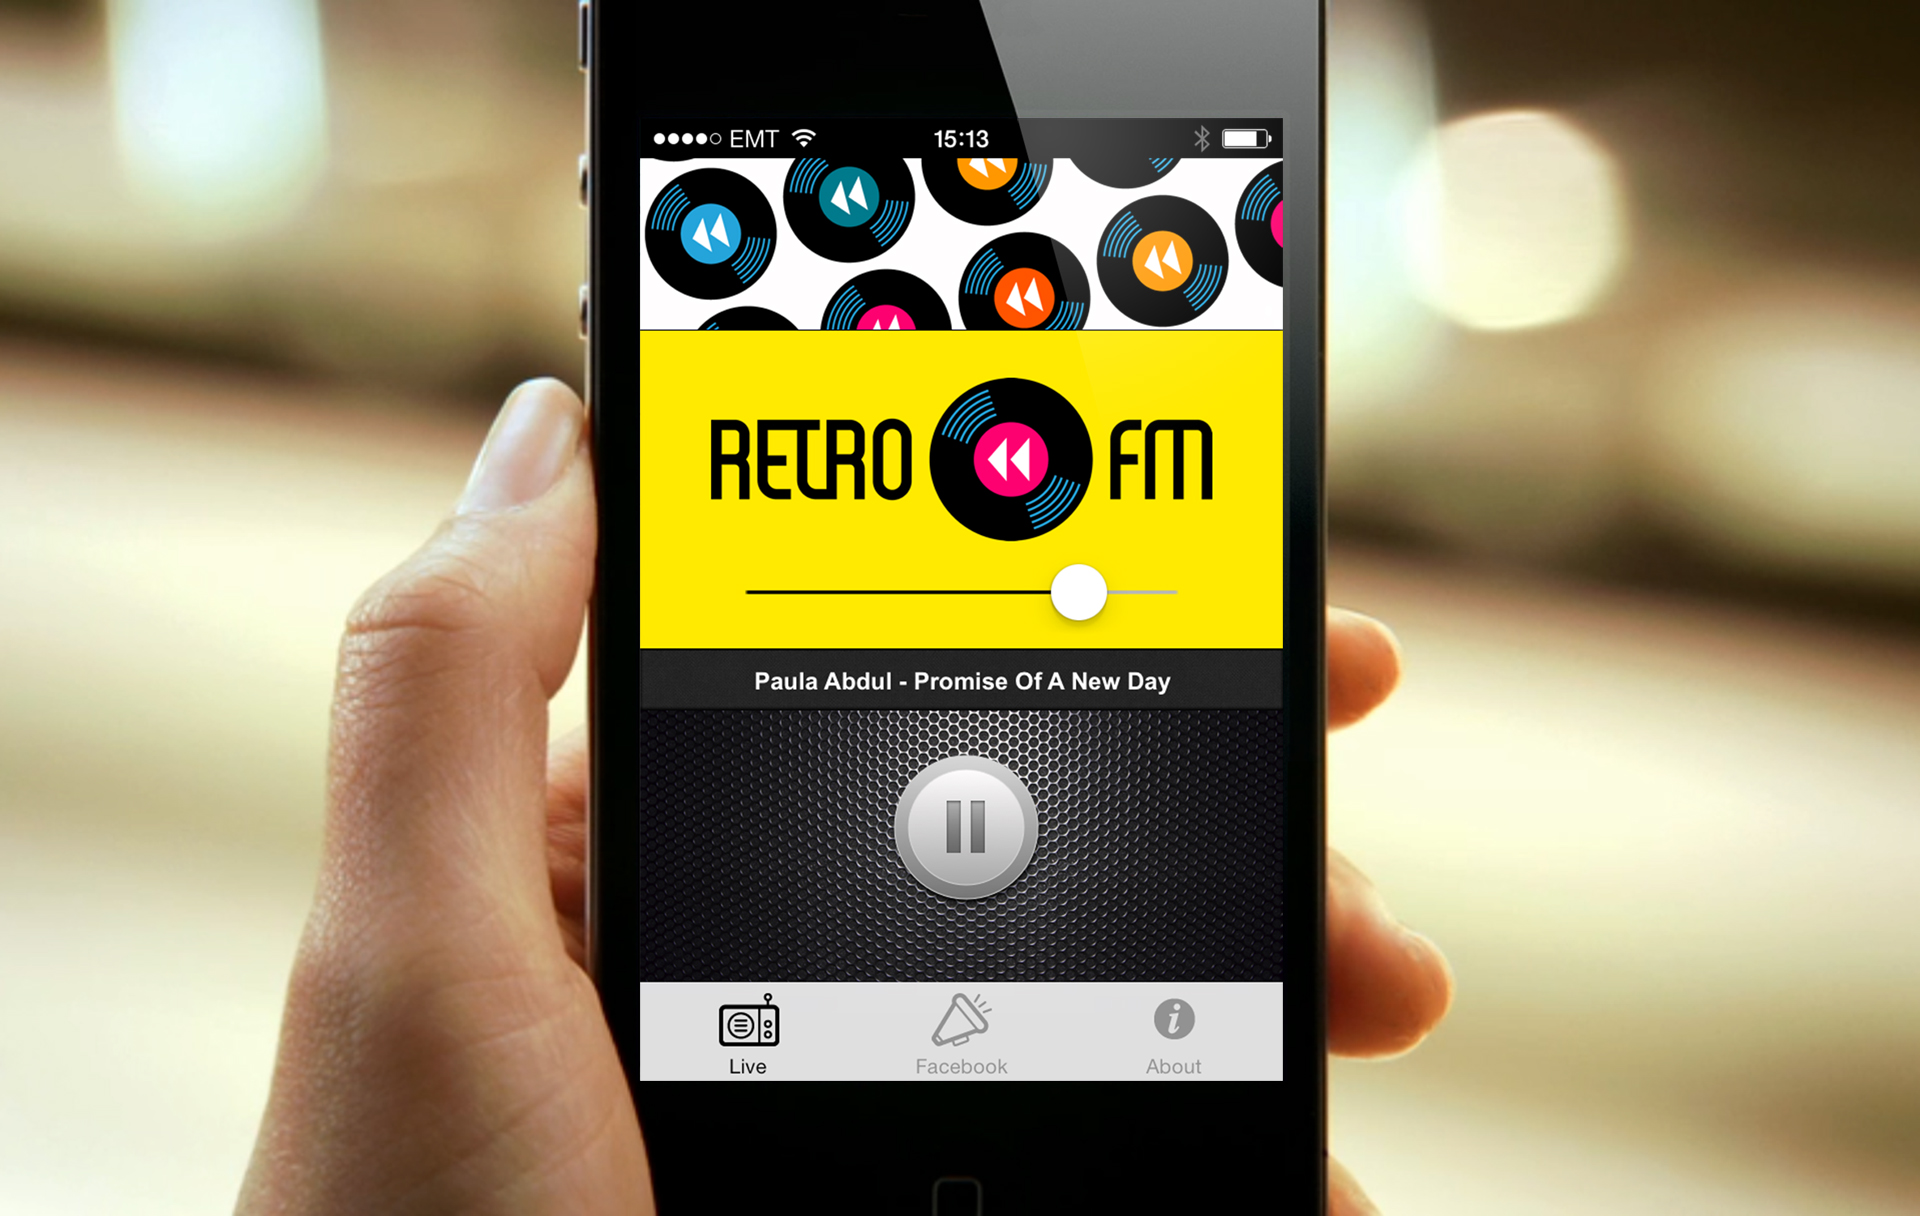 Retro FM rebranding project involved a new visual identity for a more-than-ten-year-old-hit radio station to grow their audience.